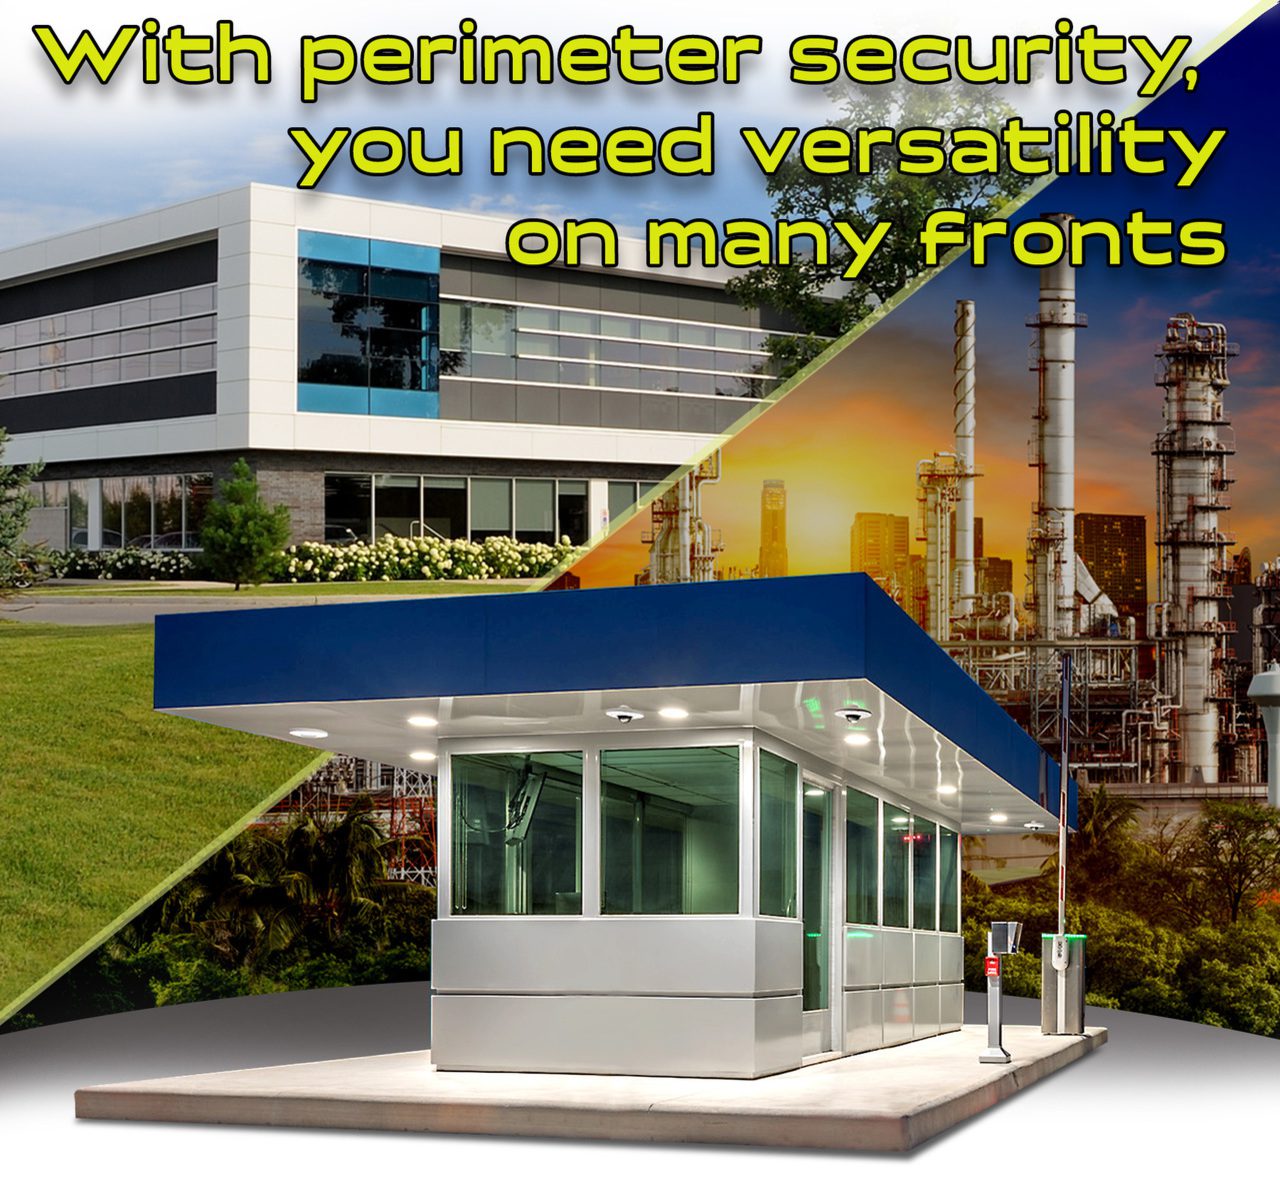 With perimeter security, you need versatility on many fronts